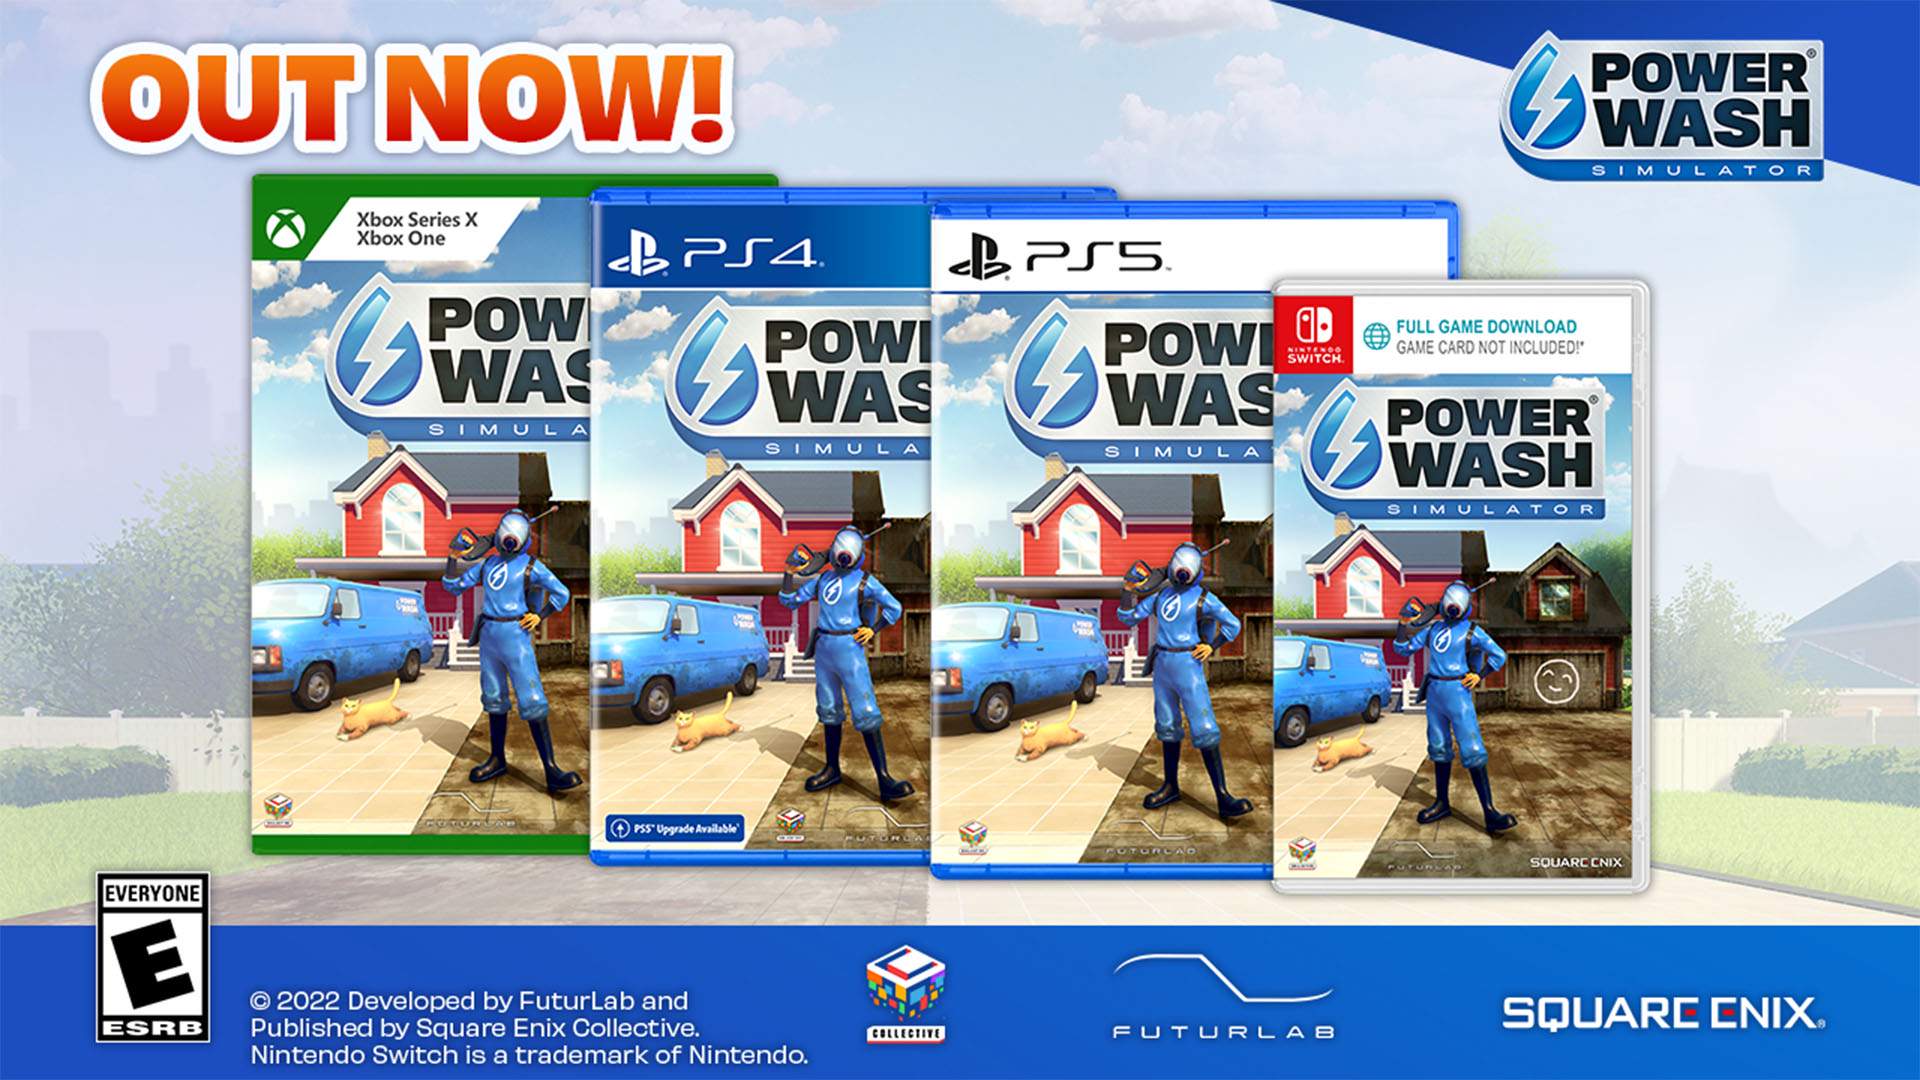 Is Power Wash Simulator Getting An Xbox & PS4, PS5 Release?